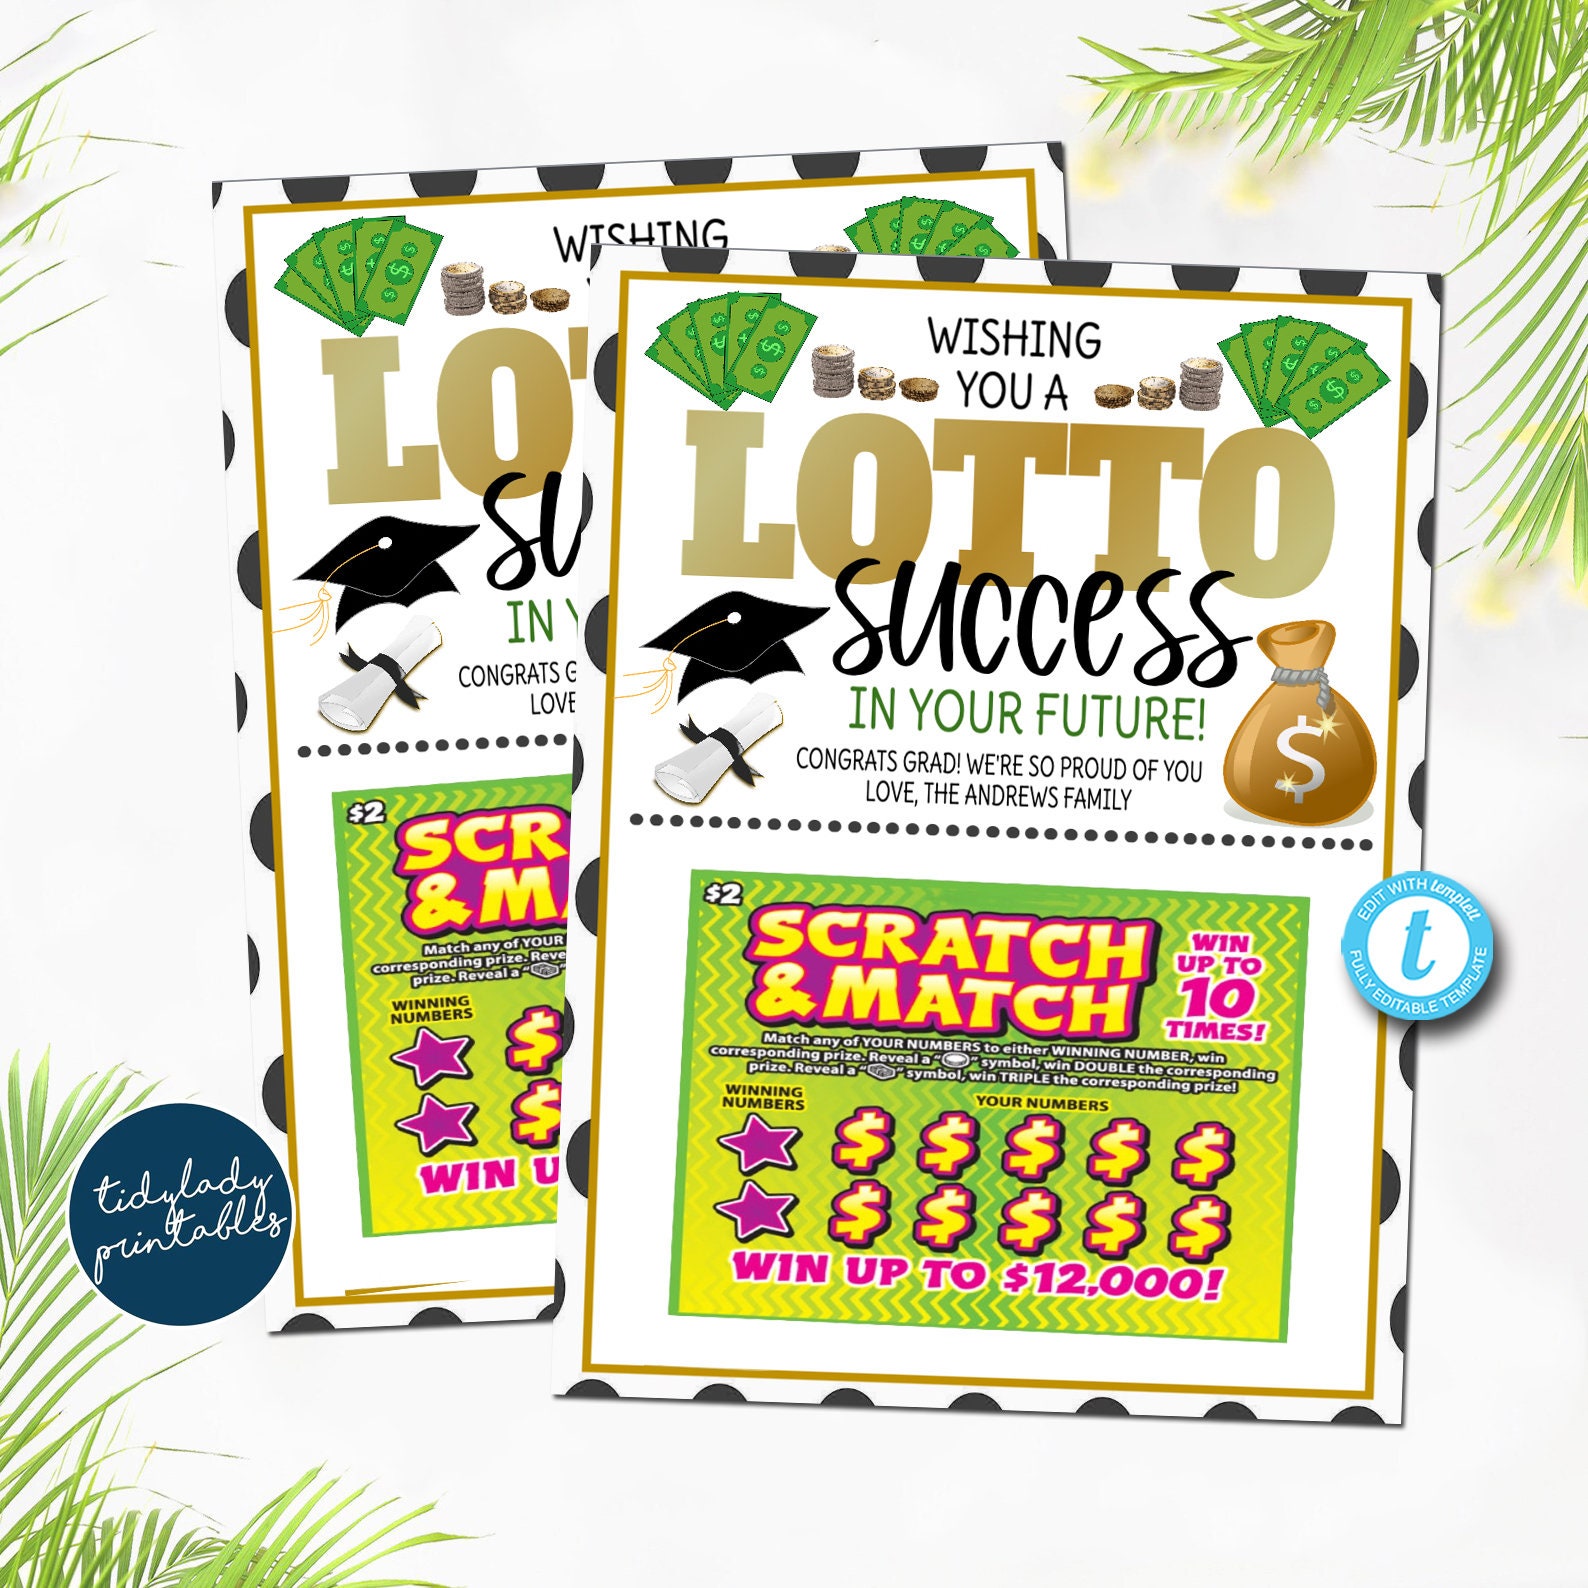 Graduation Lottery Ticket Favor Holder, Graduation Party Favors for Guests, Lottery  Scratch Card Holder, Personalized Gift for Students 